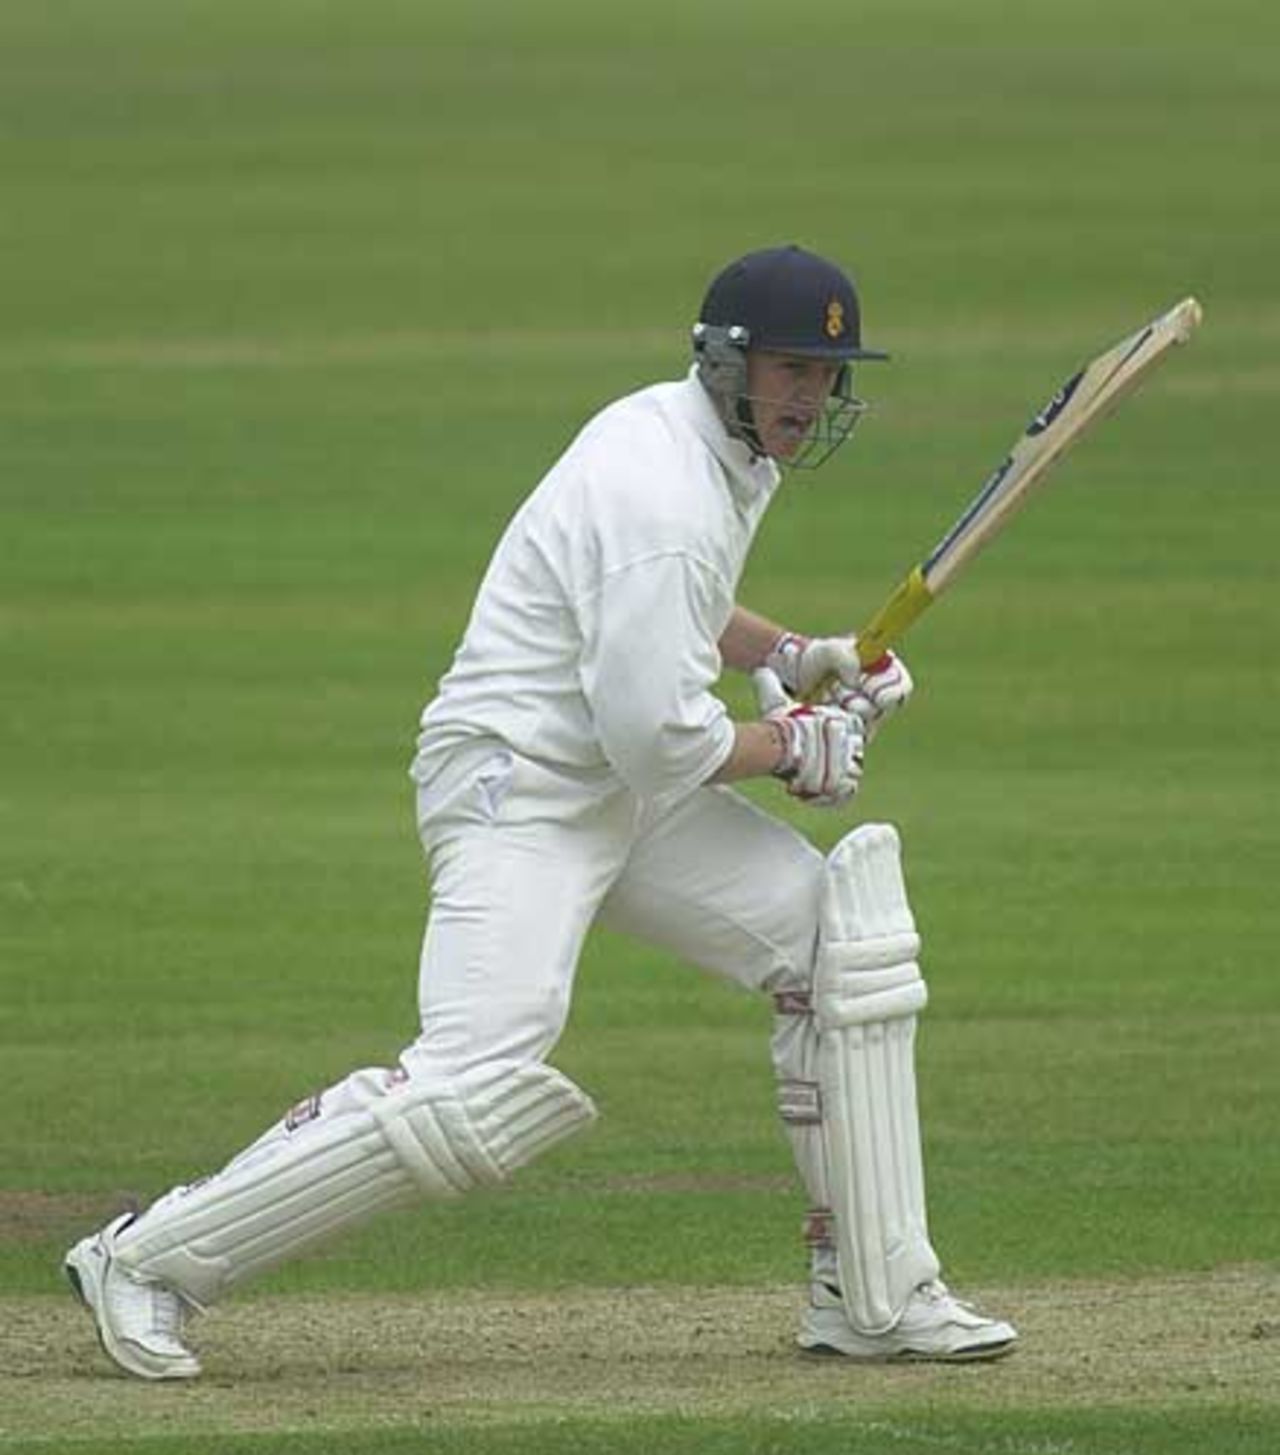 Andrew Gait at the crease on day one of the local derby between Notts and Derby at the County Ground Derby